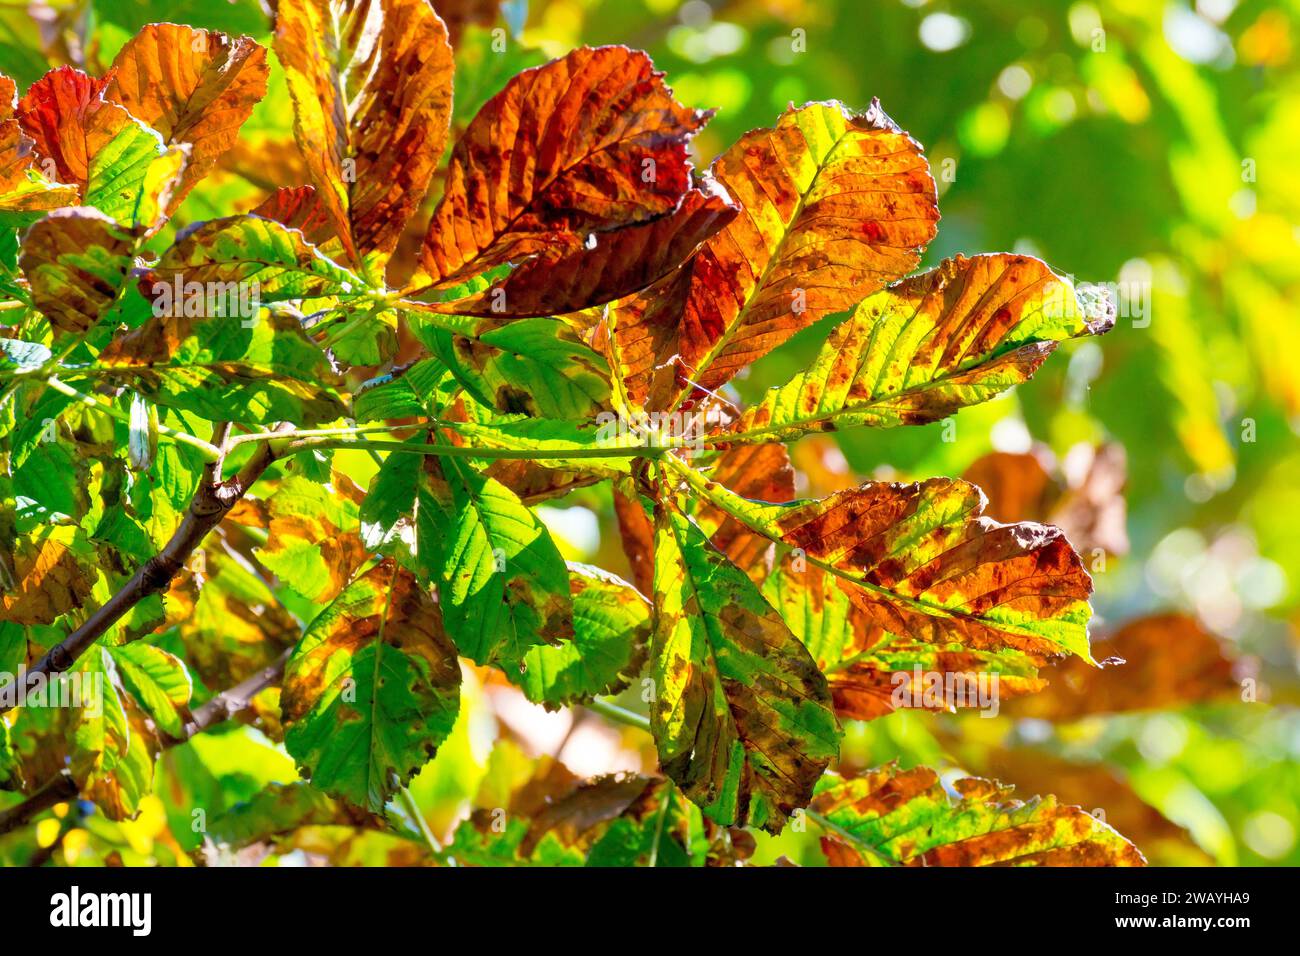 Horse Chestnut or Conker Tree (aesculus hippocastanum), close up showing the sunlit upper leaves of the tree as they change colour in early autumn. Stock Photo